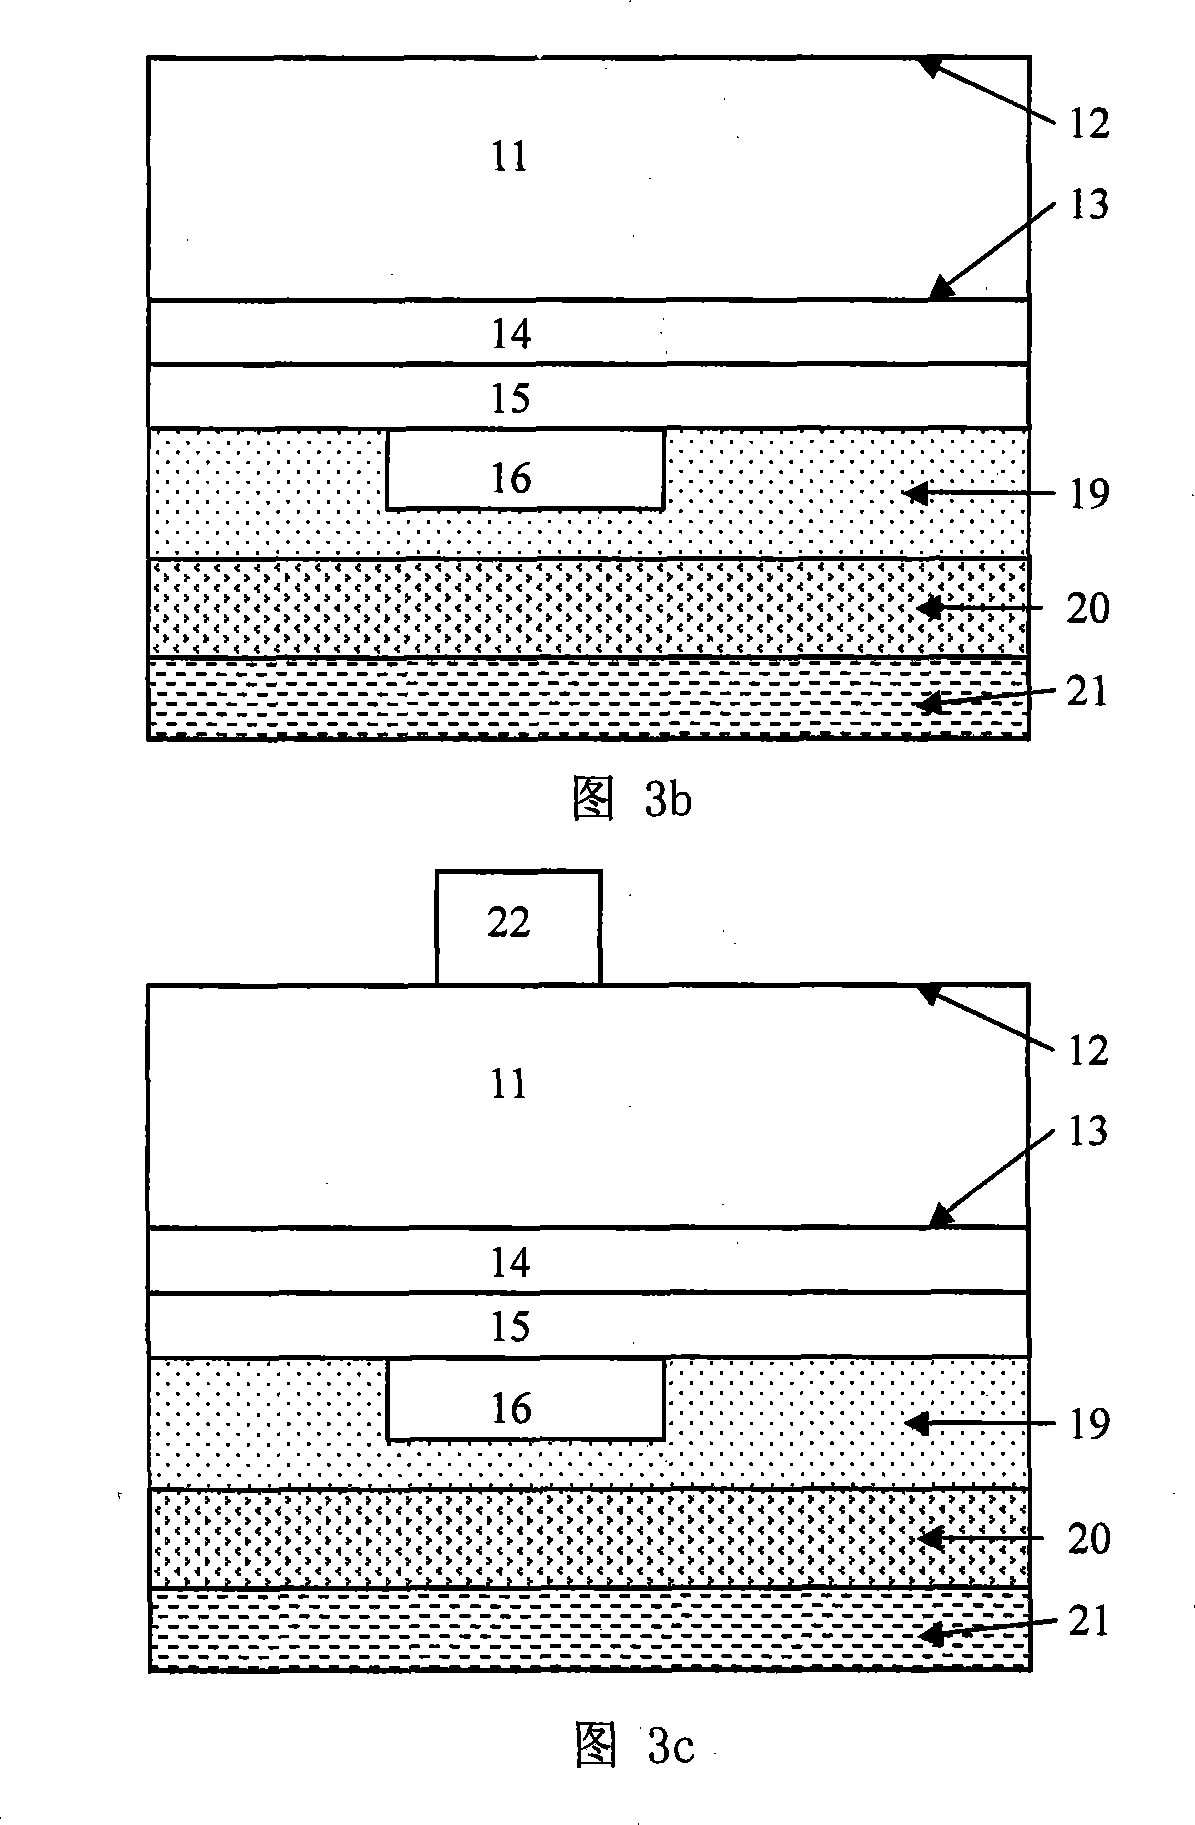 Method for forming grounding via hole between gallium nitride device and circuit